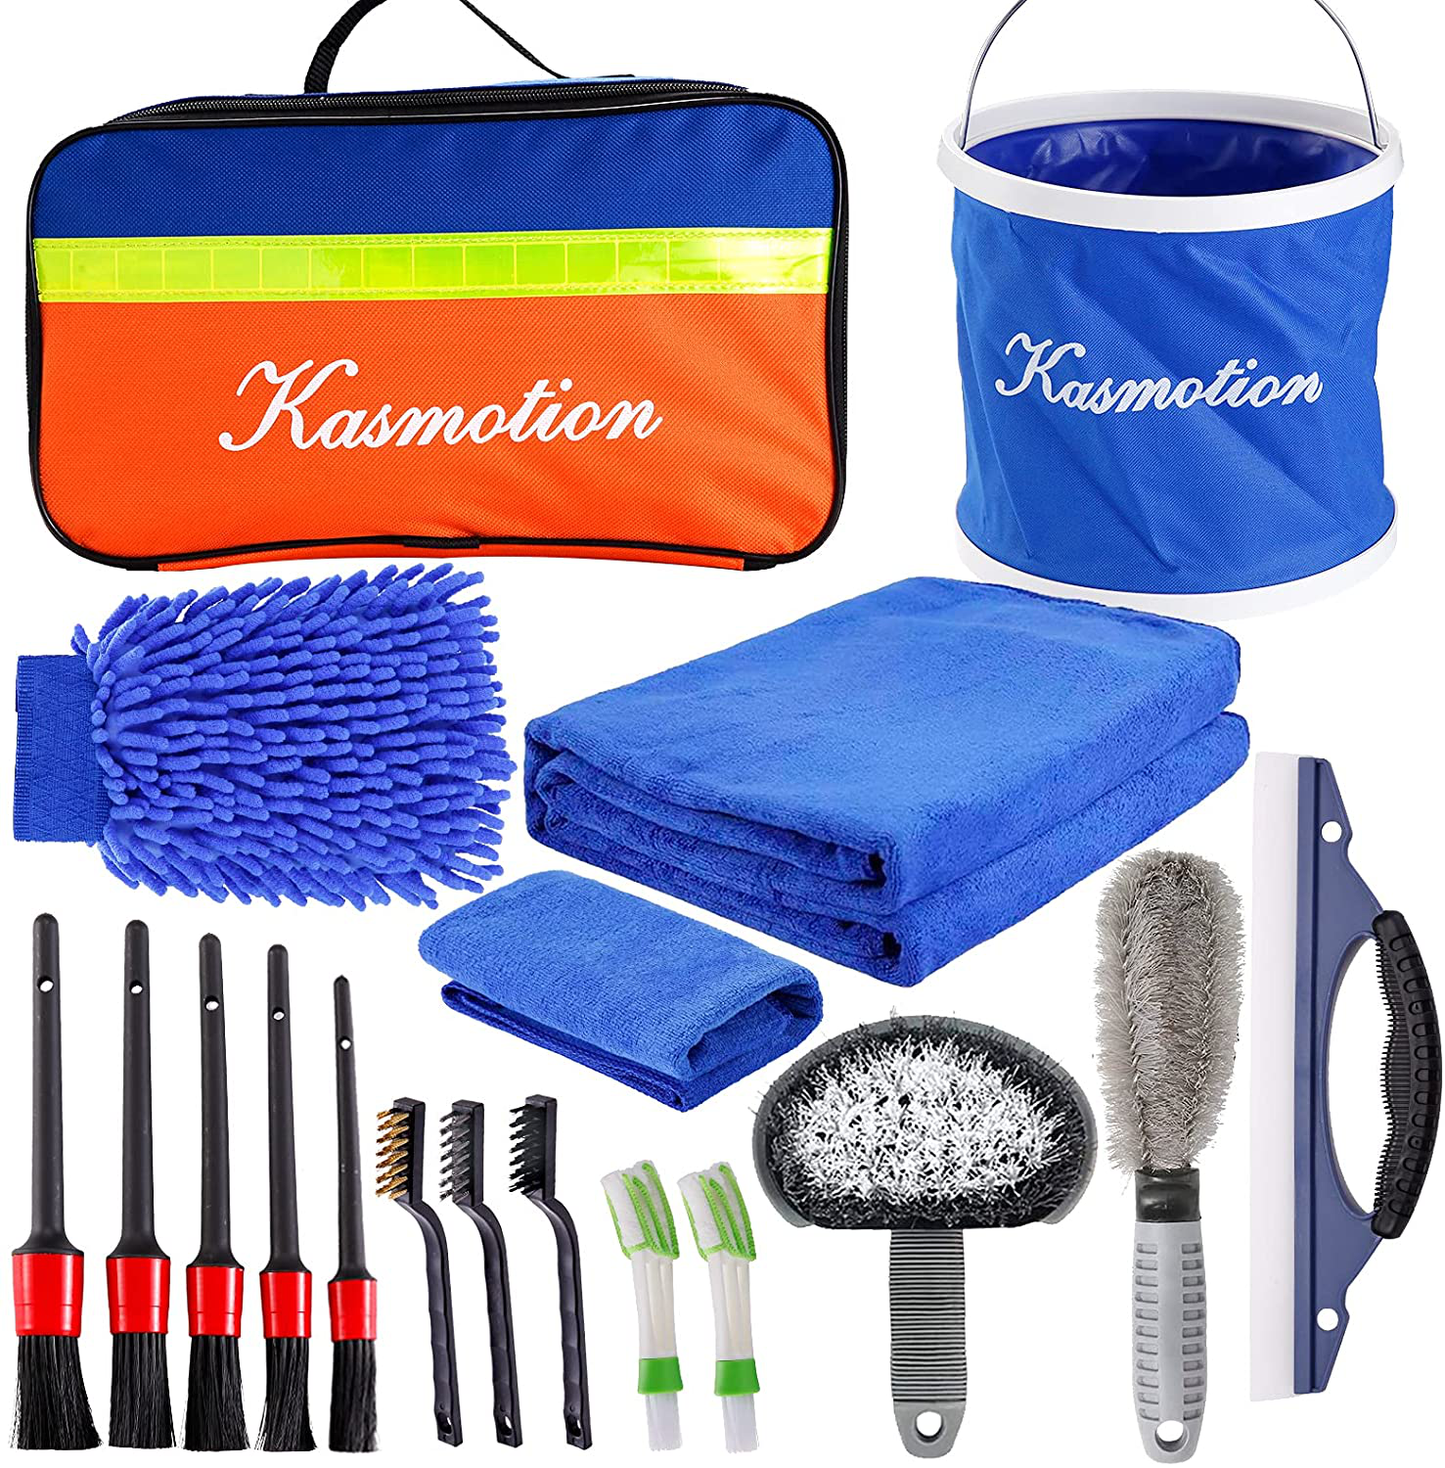 Kasmotion Car Wash Kit, 18 Pcs Car Cleaning Kit Interior Detailing and Exterior, Car Wash Cleaning Tools for Automotive Cleaning Wheels,Engine,Console Dashboard,Leather, Air Vents, Emblems